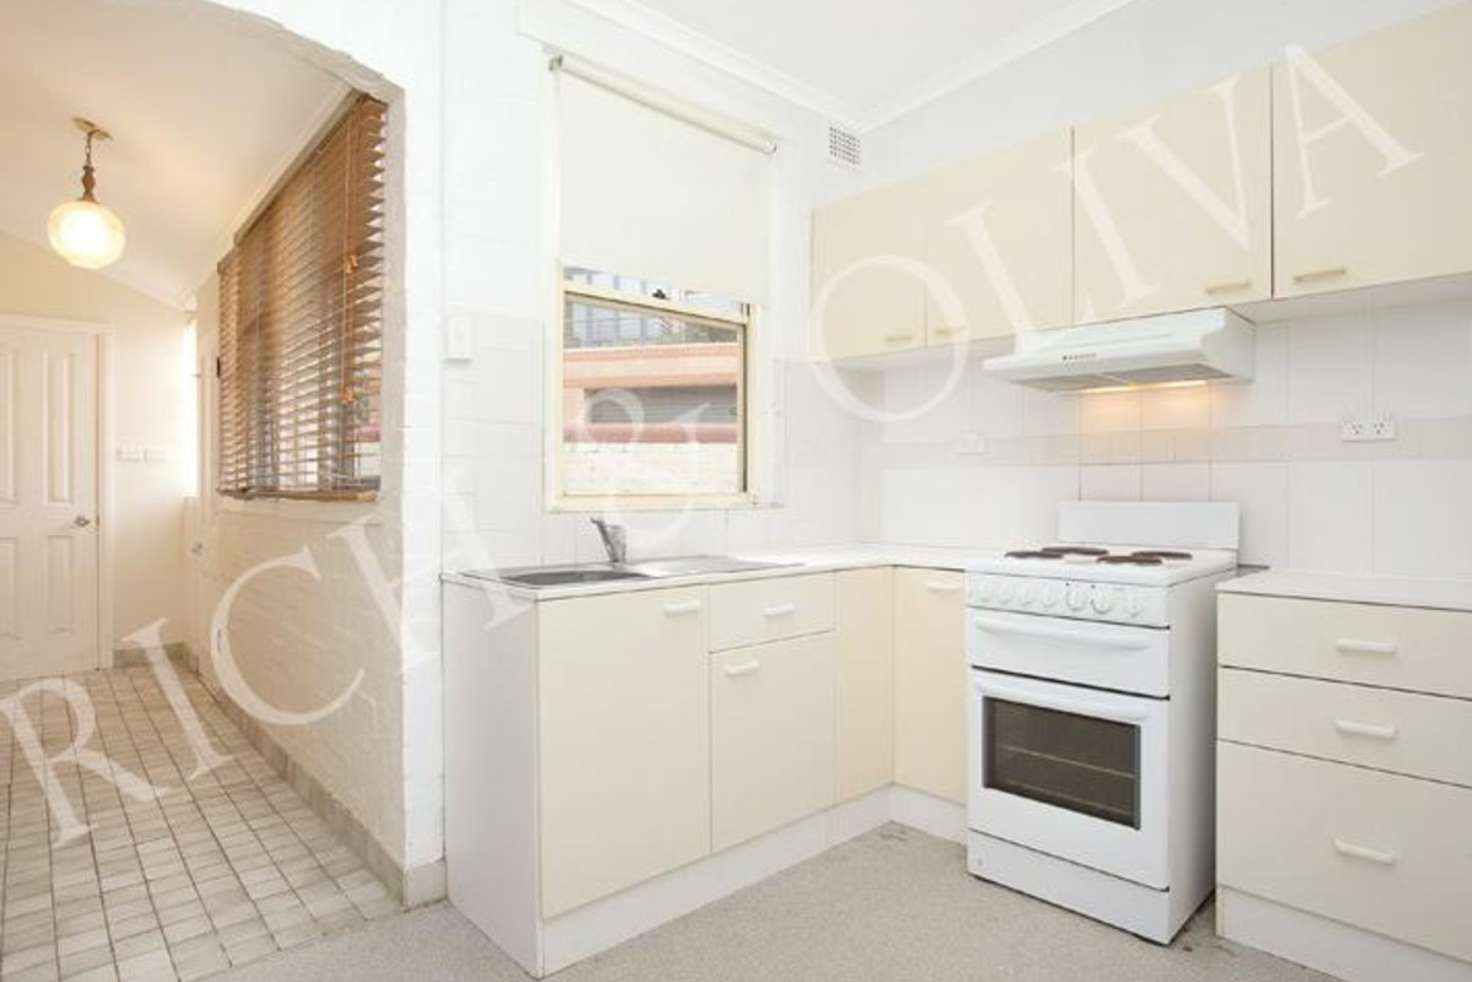 Main view of Homely house listing, 191 Beattie Street, Balmain NSW 2041